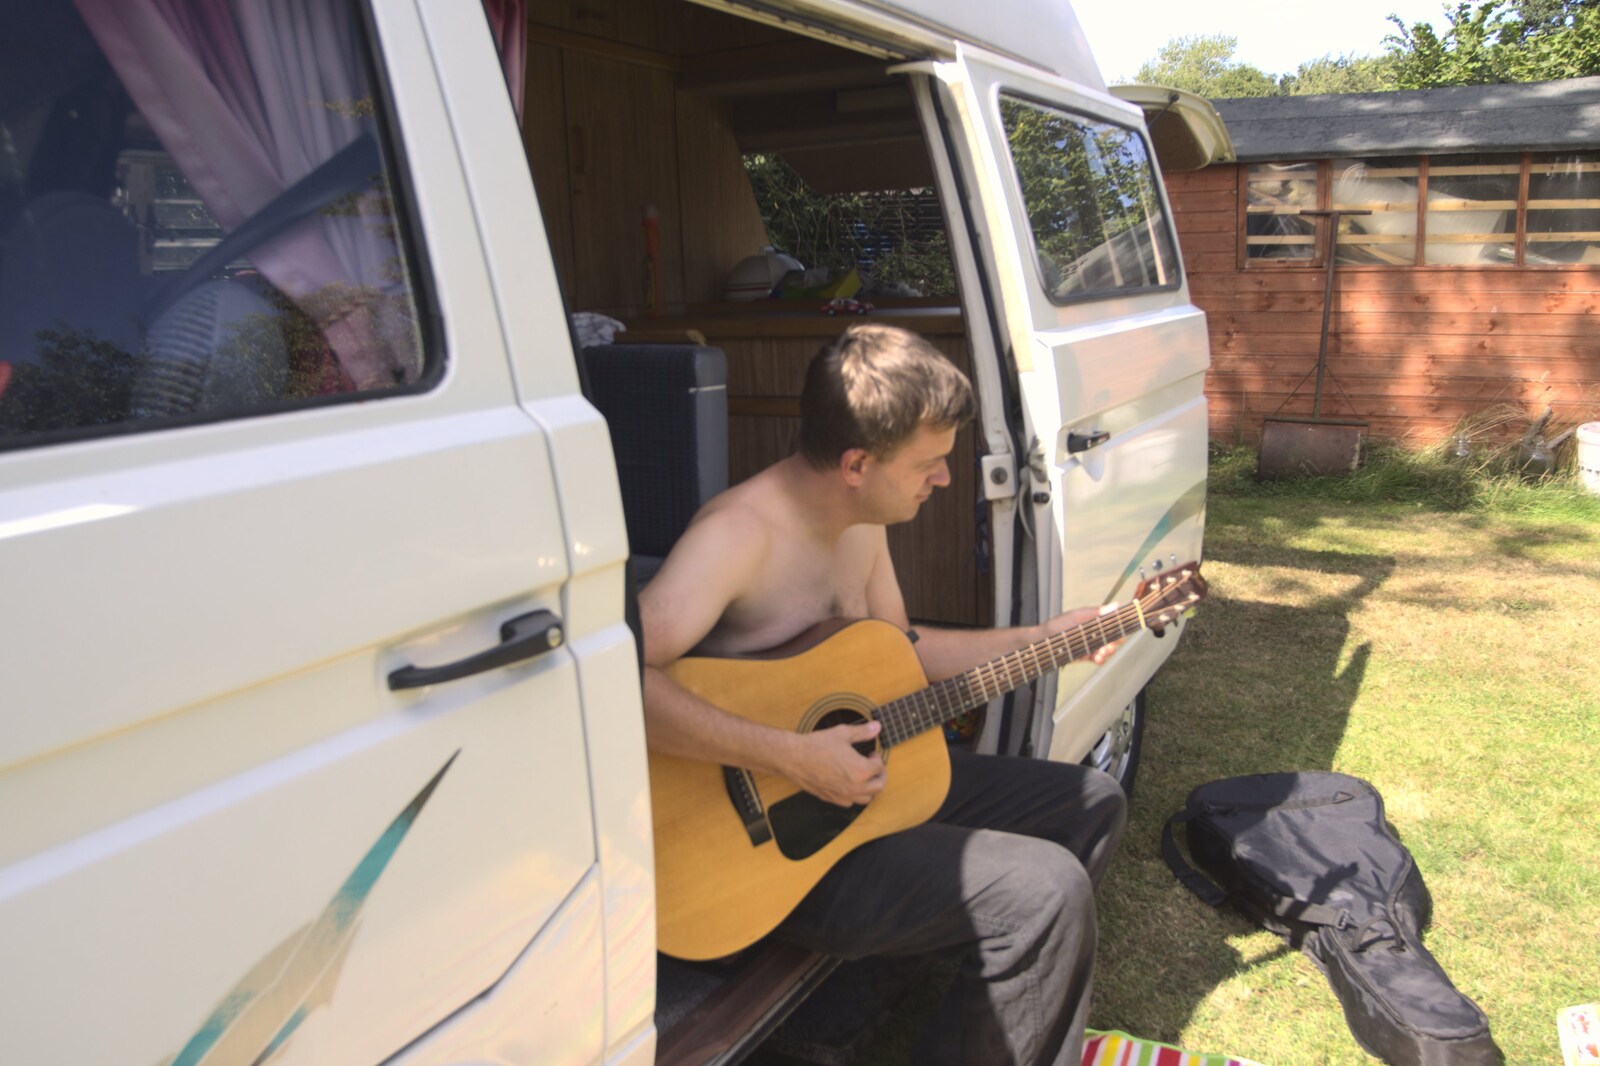 Camping with Trains, Yaxham, Norfolk - 29th August 2010: Nosher plays some guitar